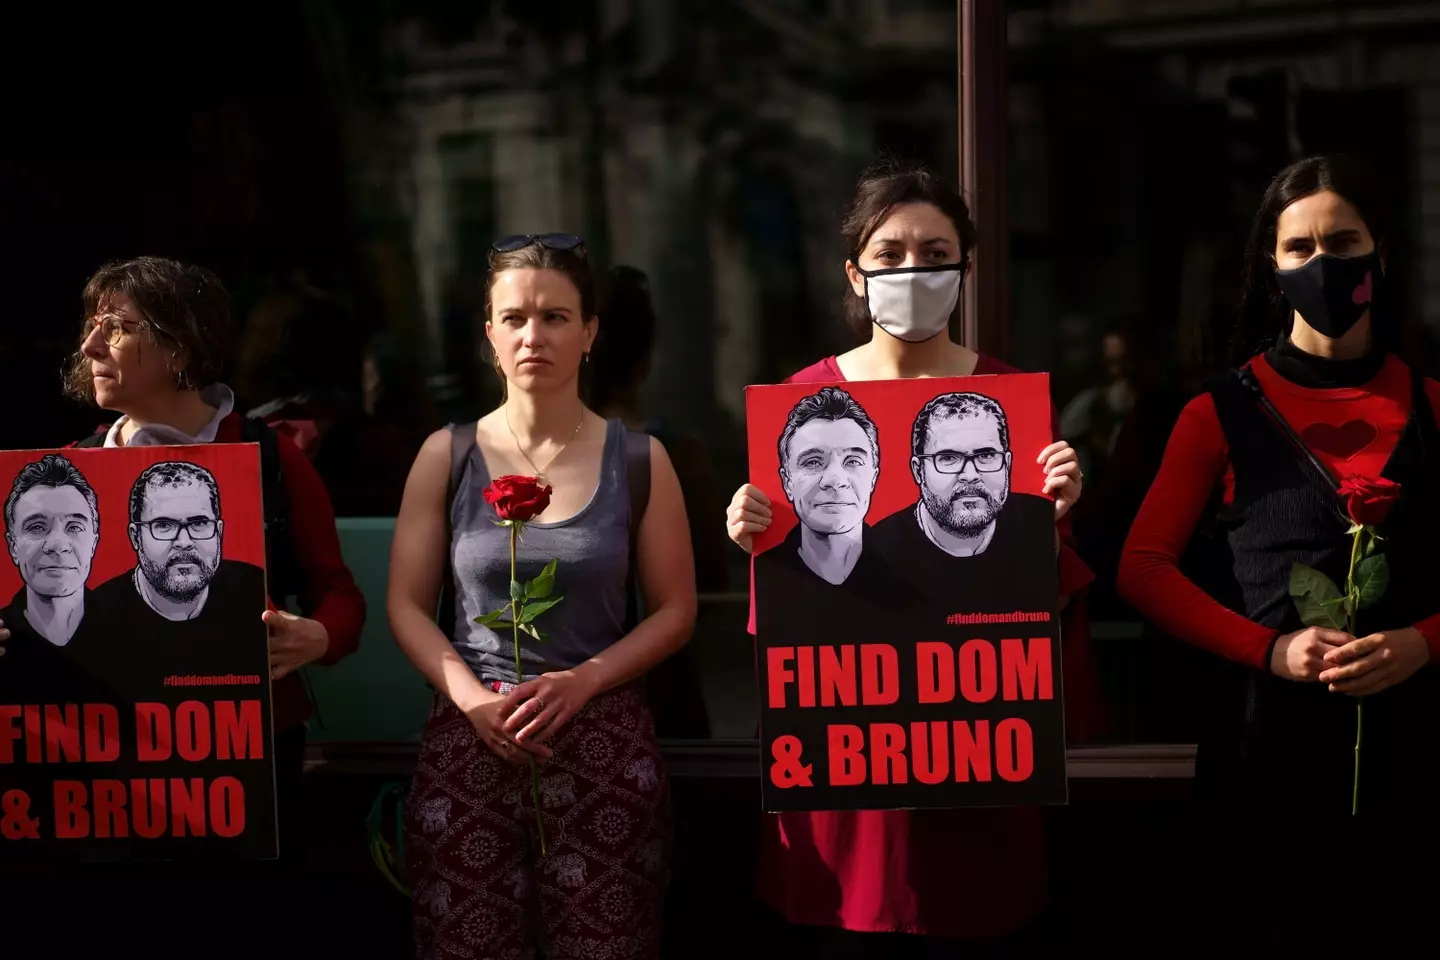 Supporters had been holding vigils outside the Brazilian embassy in London appealing to authorities to find Dom Phillips and Bruno Pereira.